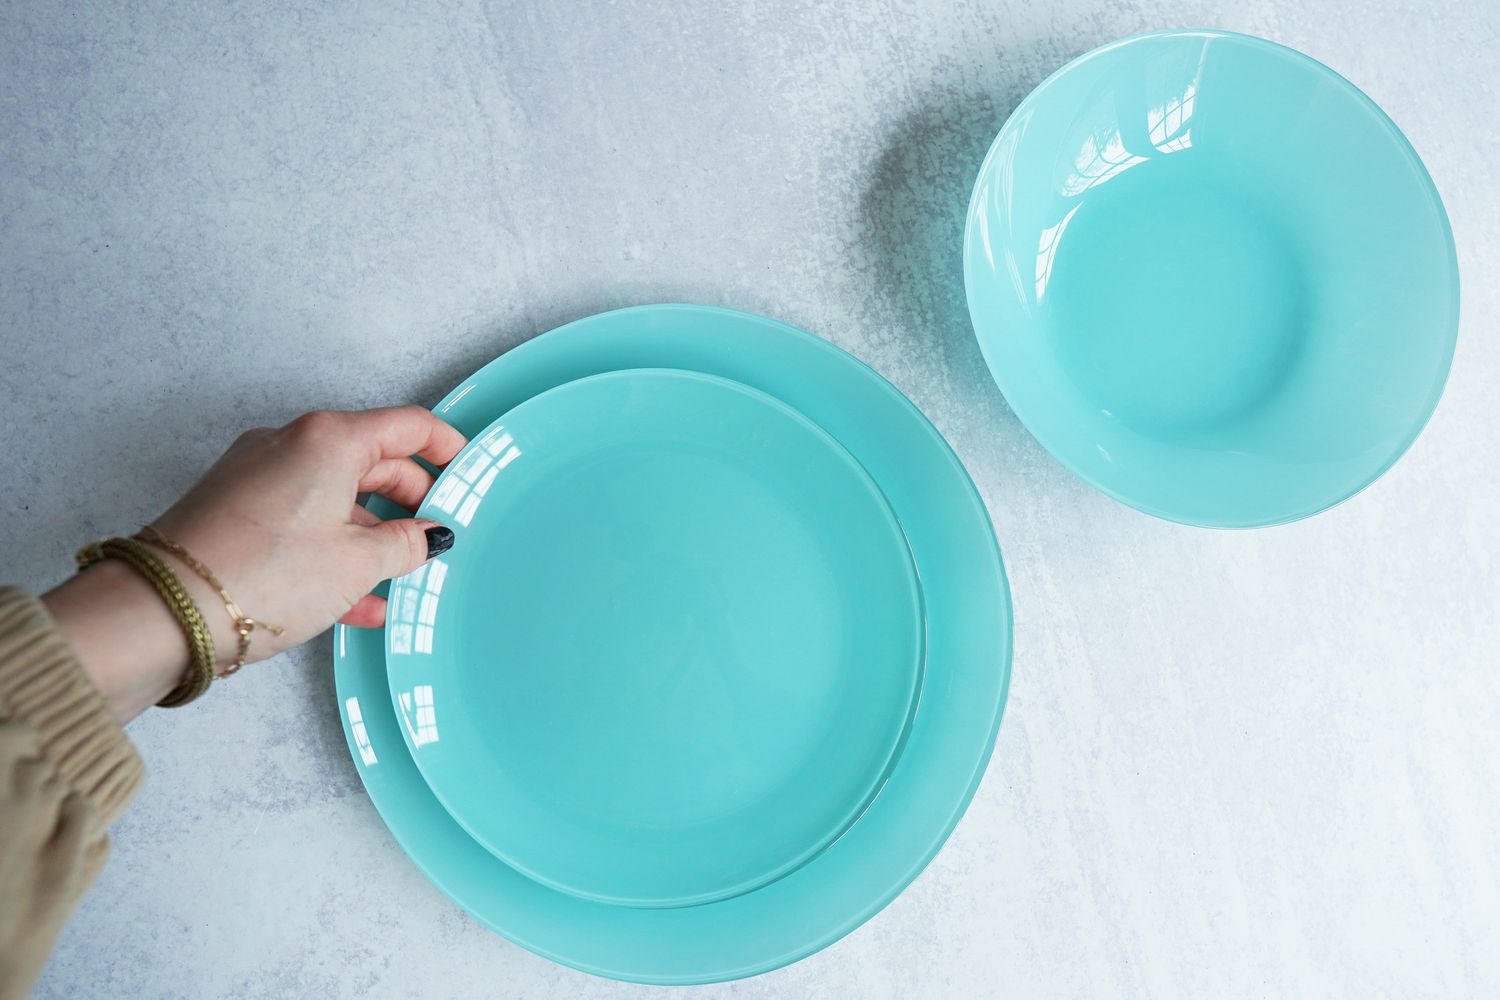 A person placing a blue plate onto another blue plate